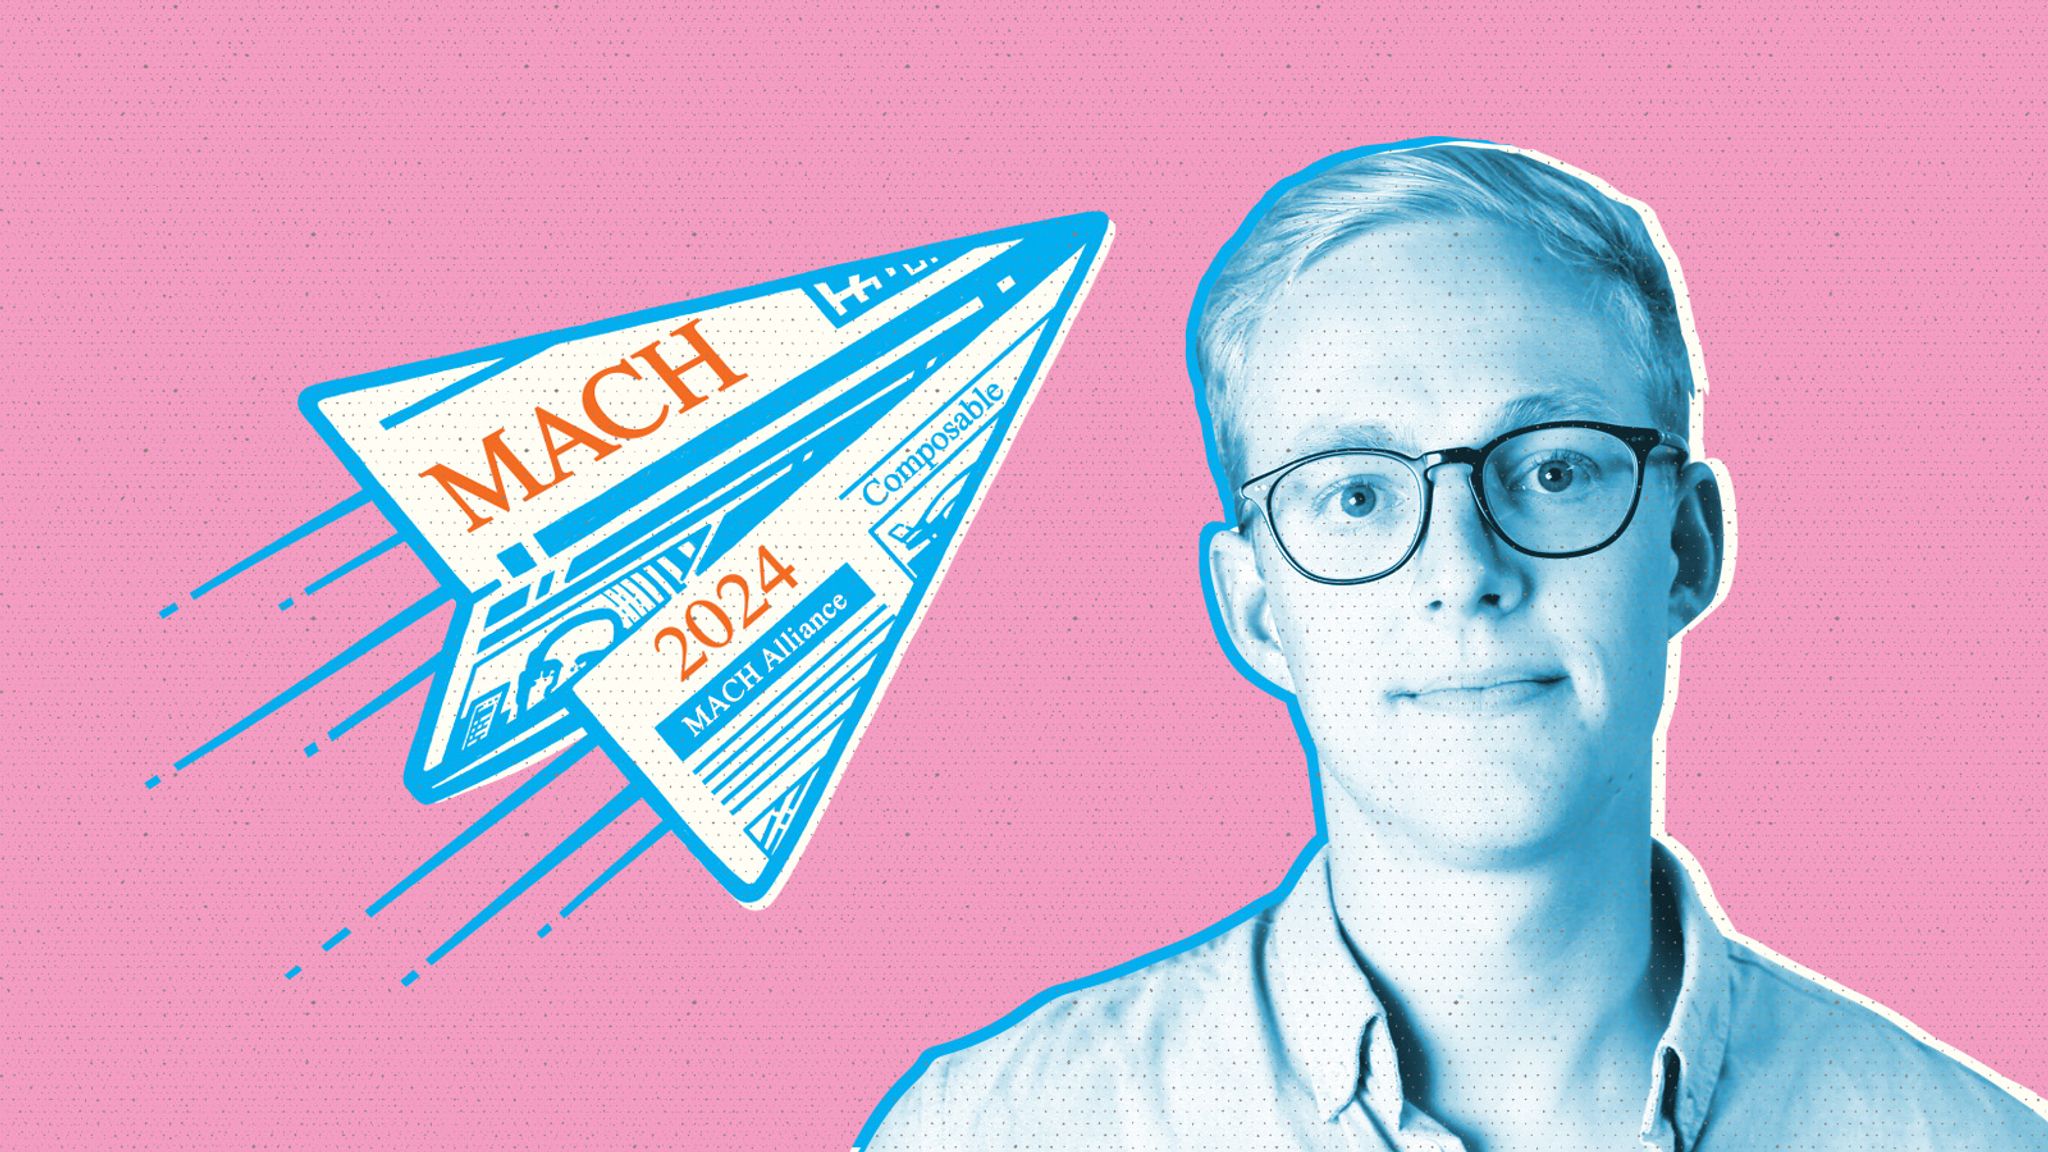 Paper airplane made of newspaper, featuring the words "MACH," "2024," "MACH Alliance," and "Composable." To the right, a headshot of Casper Rasmussen, president of MACH Alliance. Poster pop art treatment to all graphics.